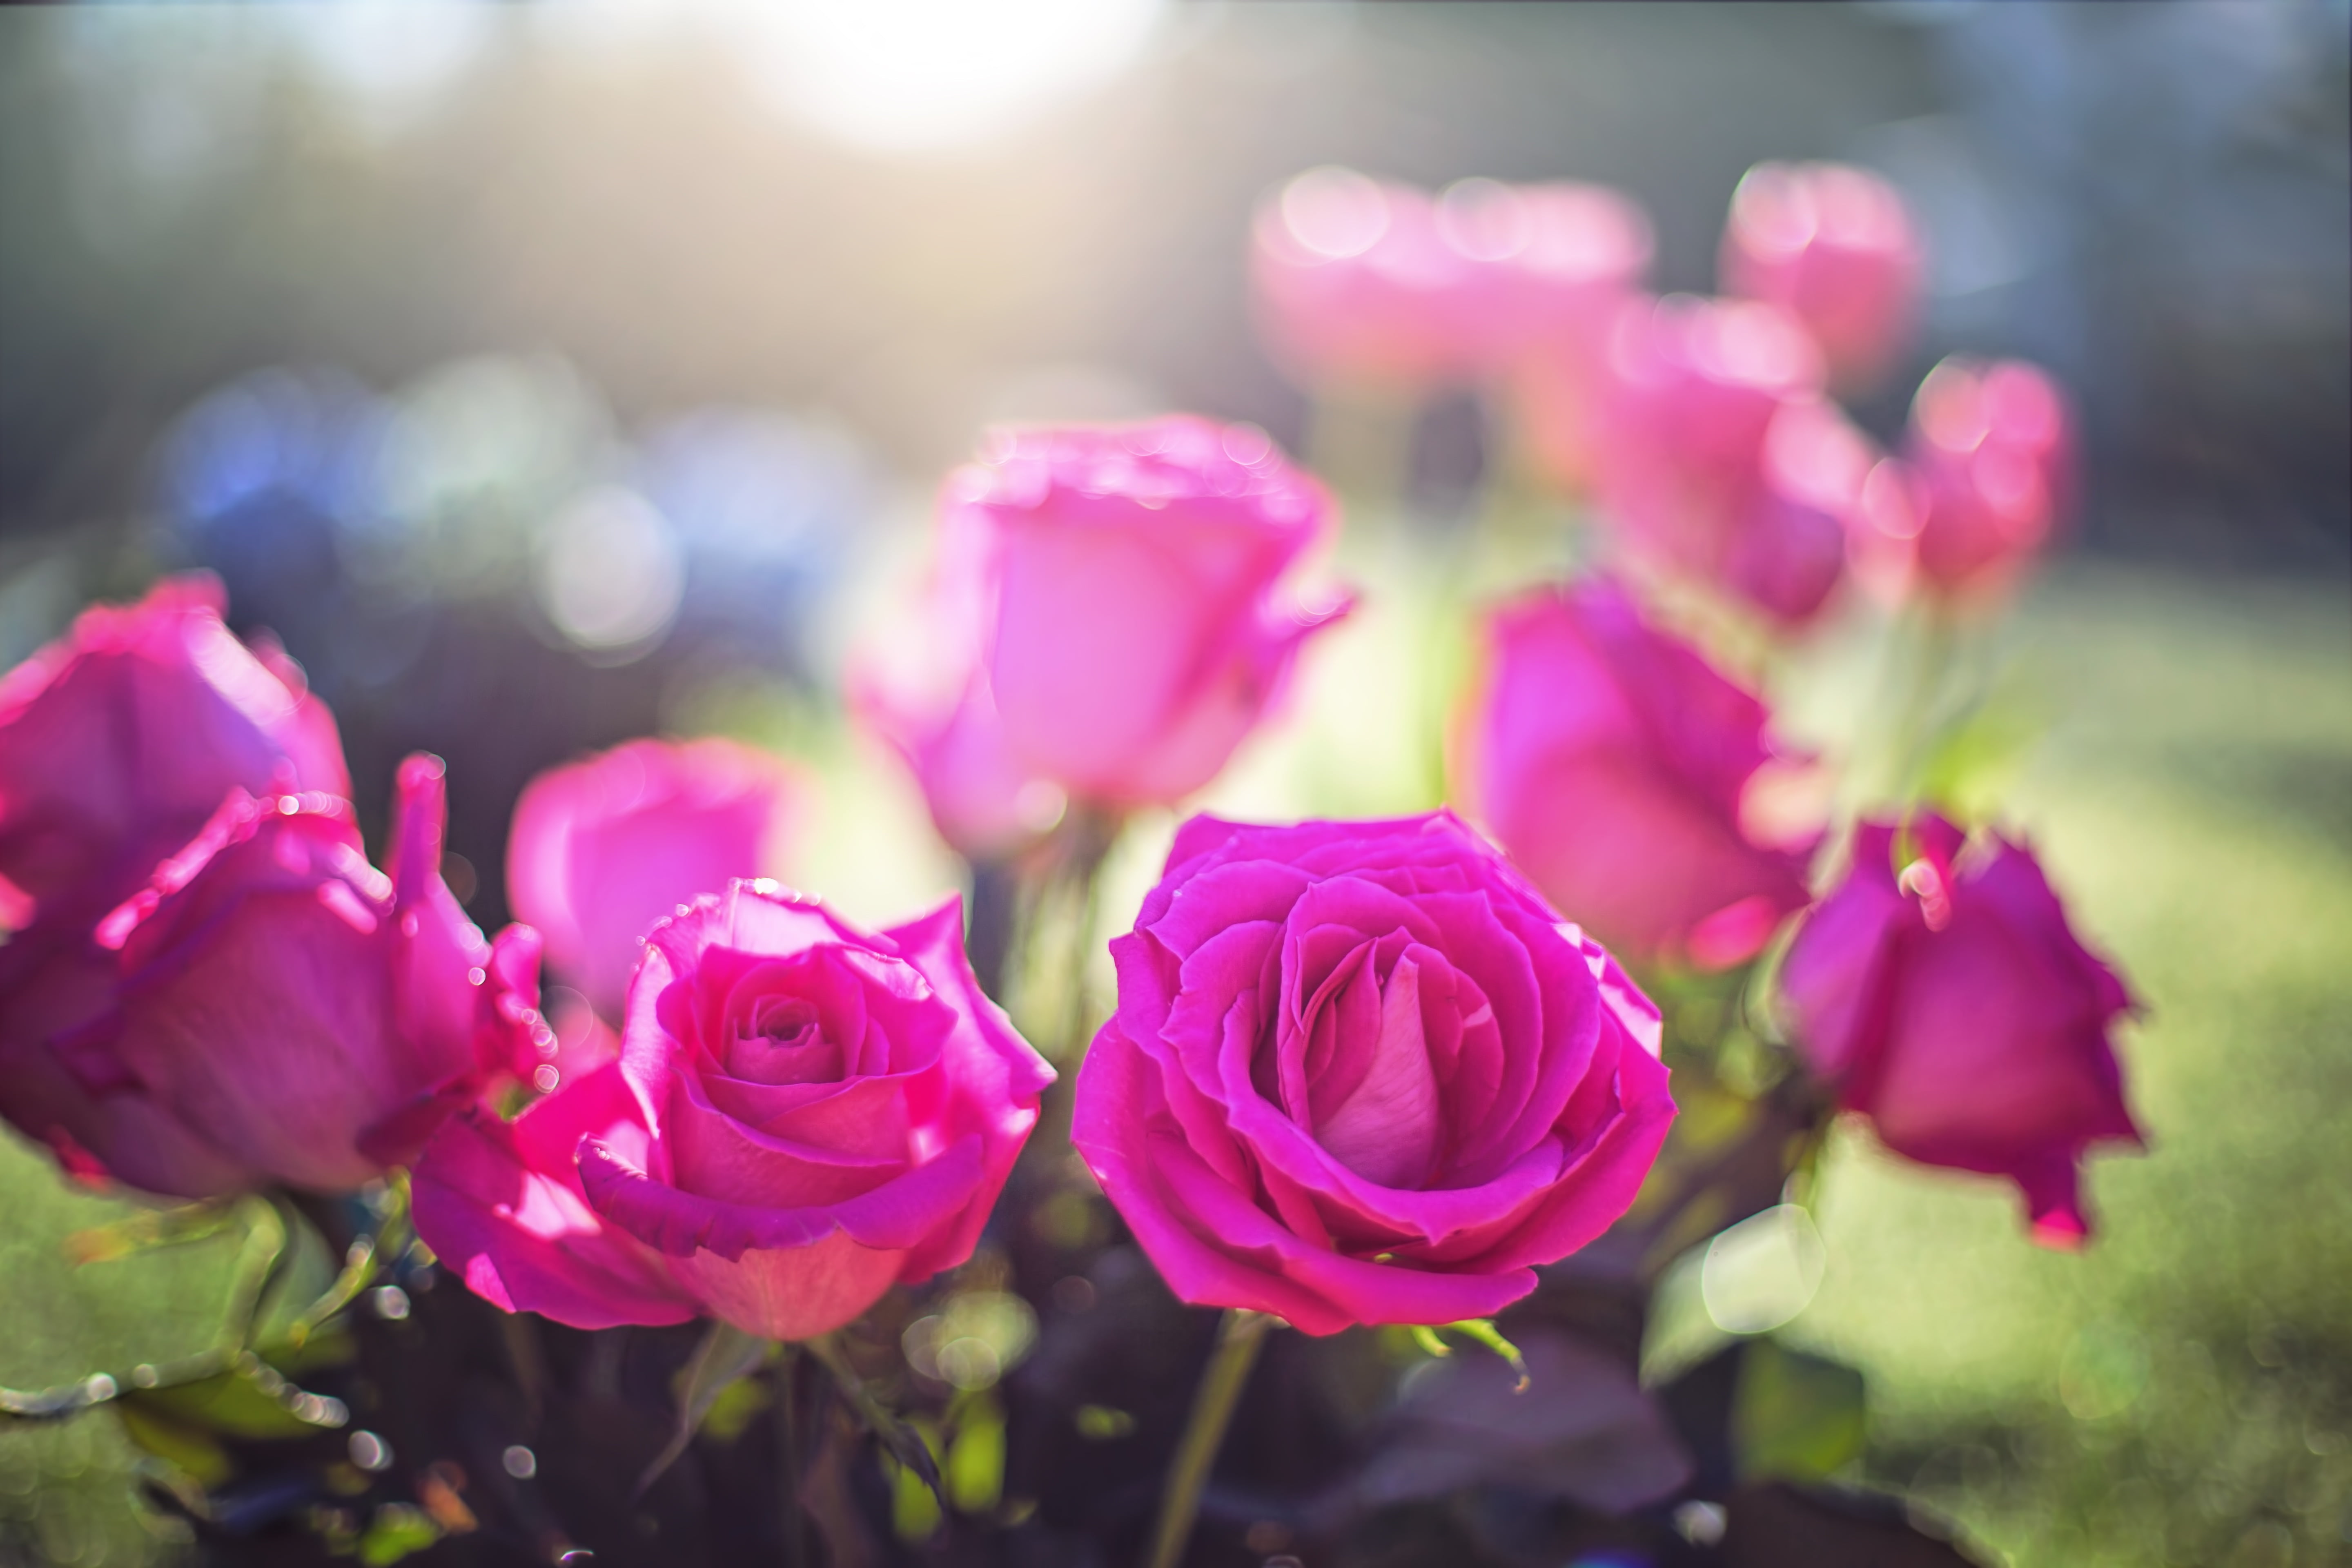 Pink Flowers, Roses, Buds, Light, Nature, Plant, Pink - Latest Good Morning Image 2019 , HD Wallpaper & Backgrounds